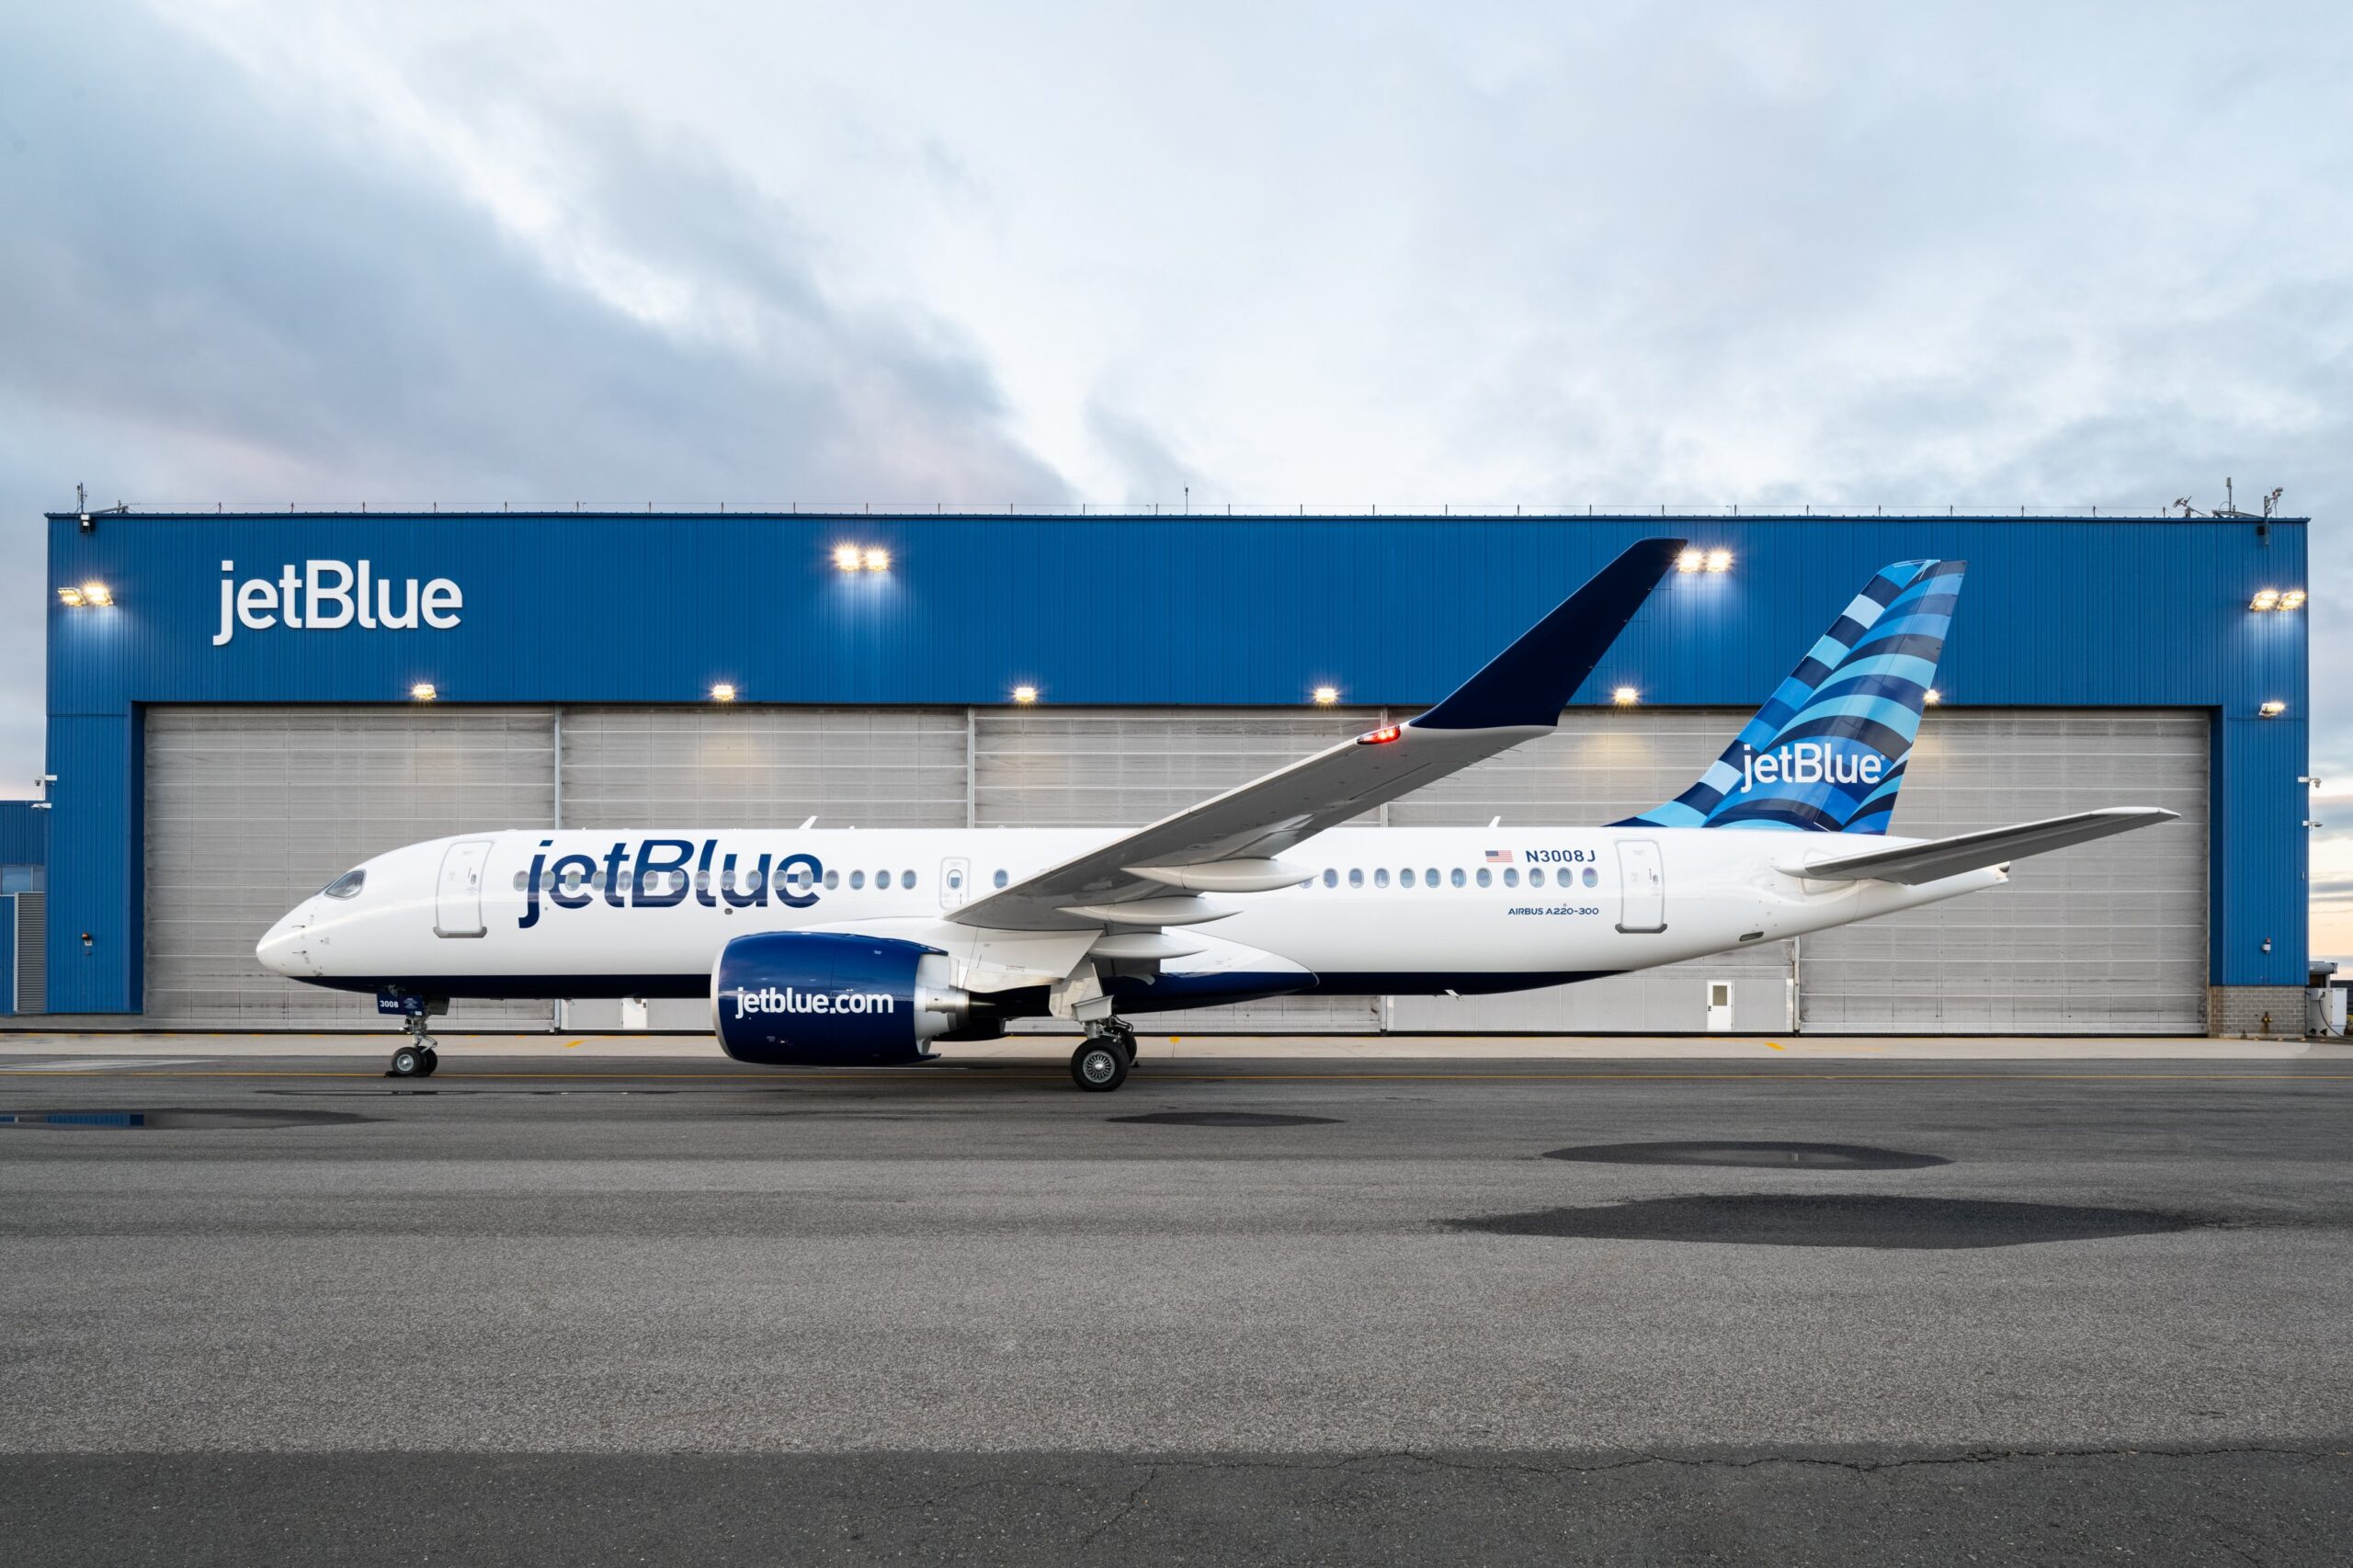 How JetBlue Used Data Observability To Help Improve Internal “Data NPS” By 16 Points Year Over Year